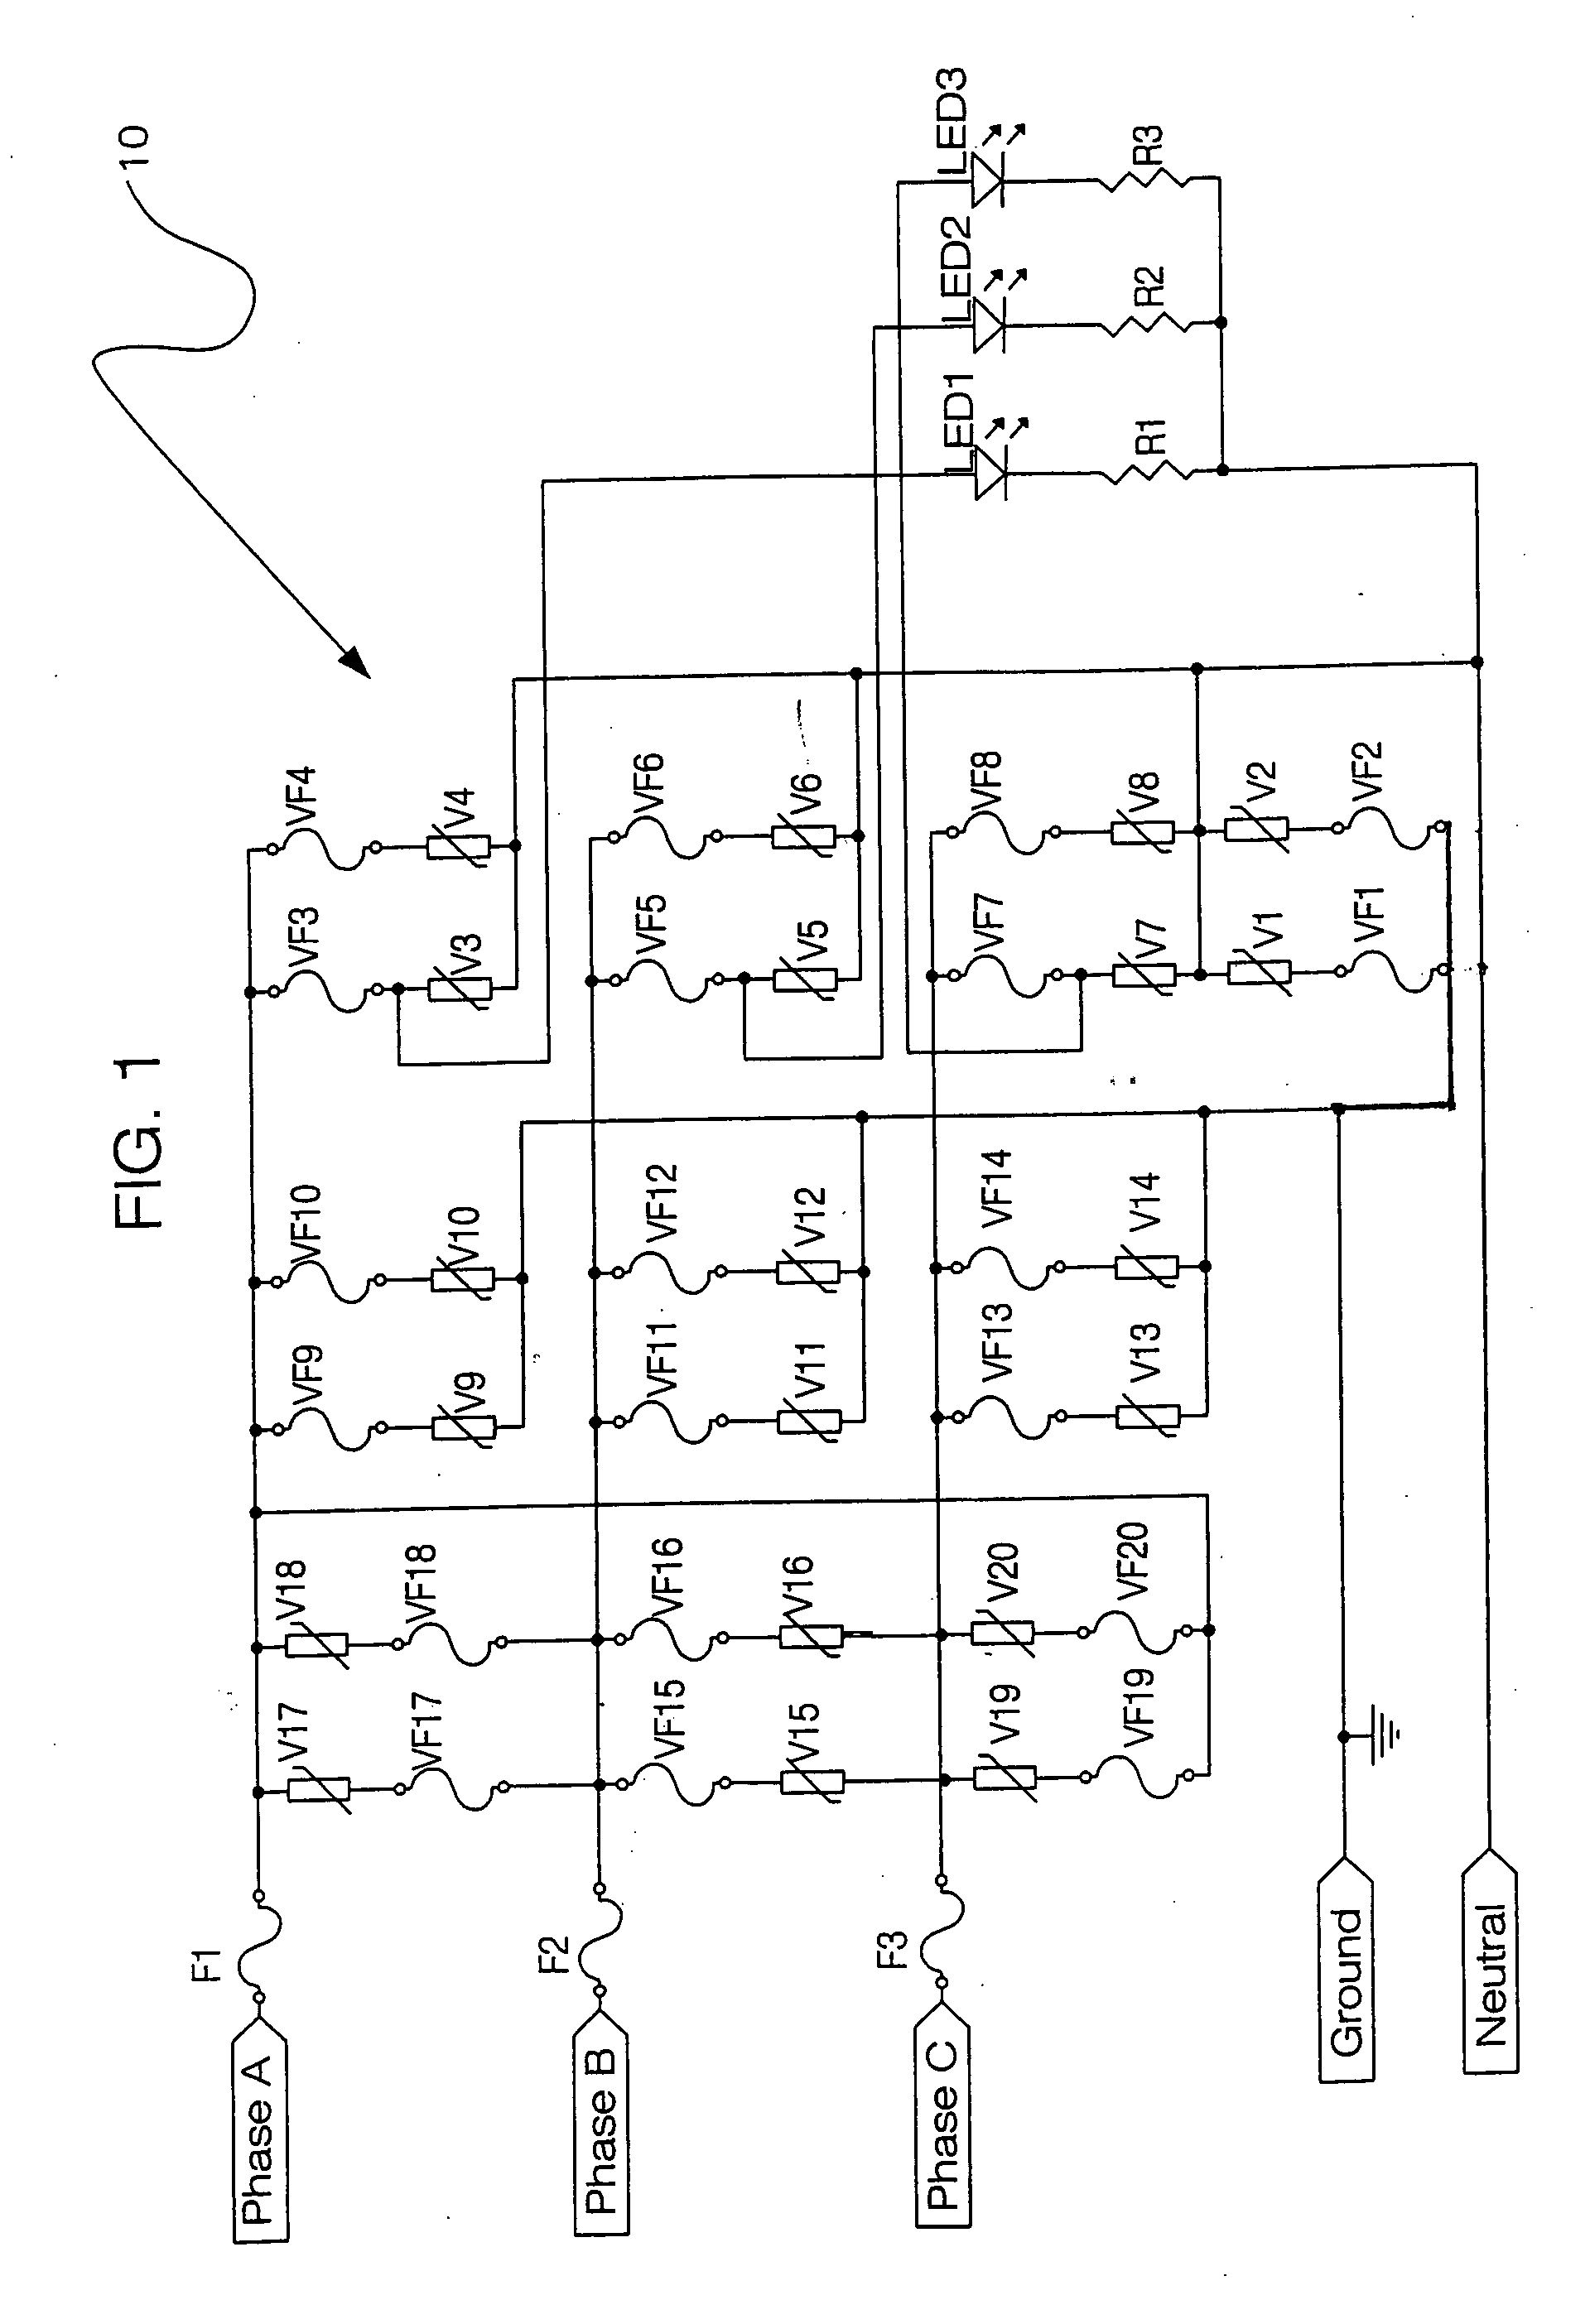 Apparatus and method for fusing voltage surge and transient anomalies in a surge suppression device